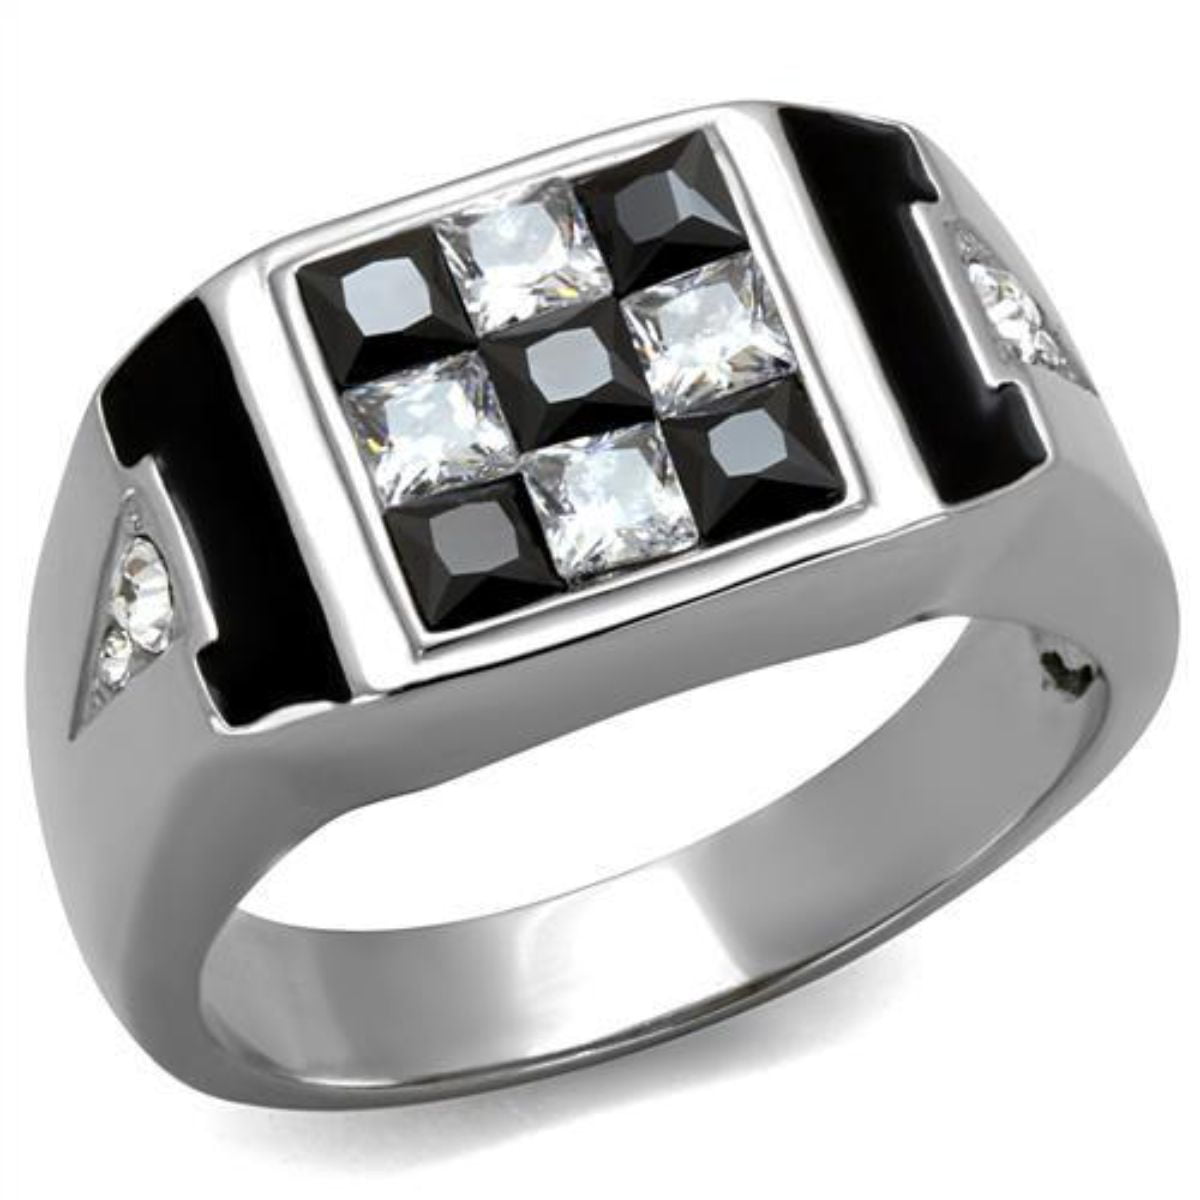 MEN'S BLACK STAINLESS STEEL ROUND SOLITAIRE CZ SQUARE RING